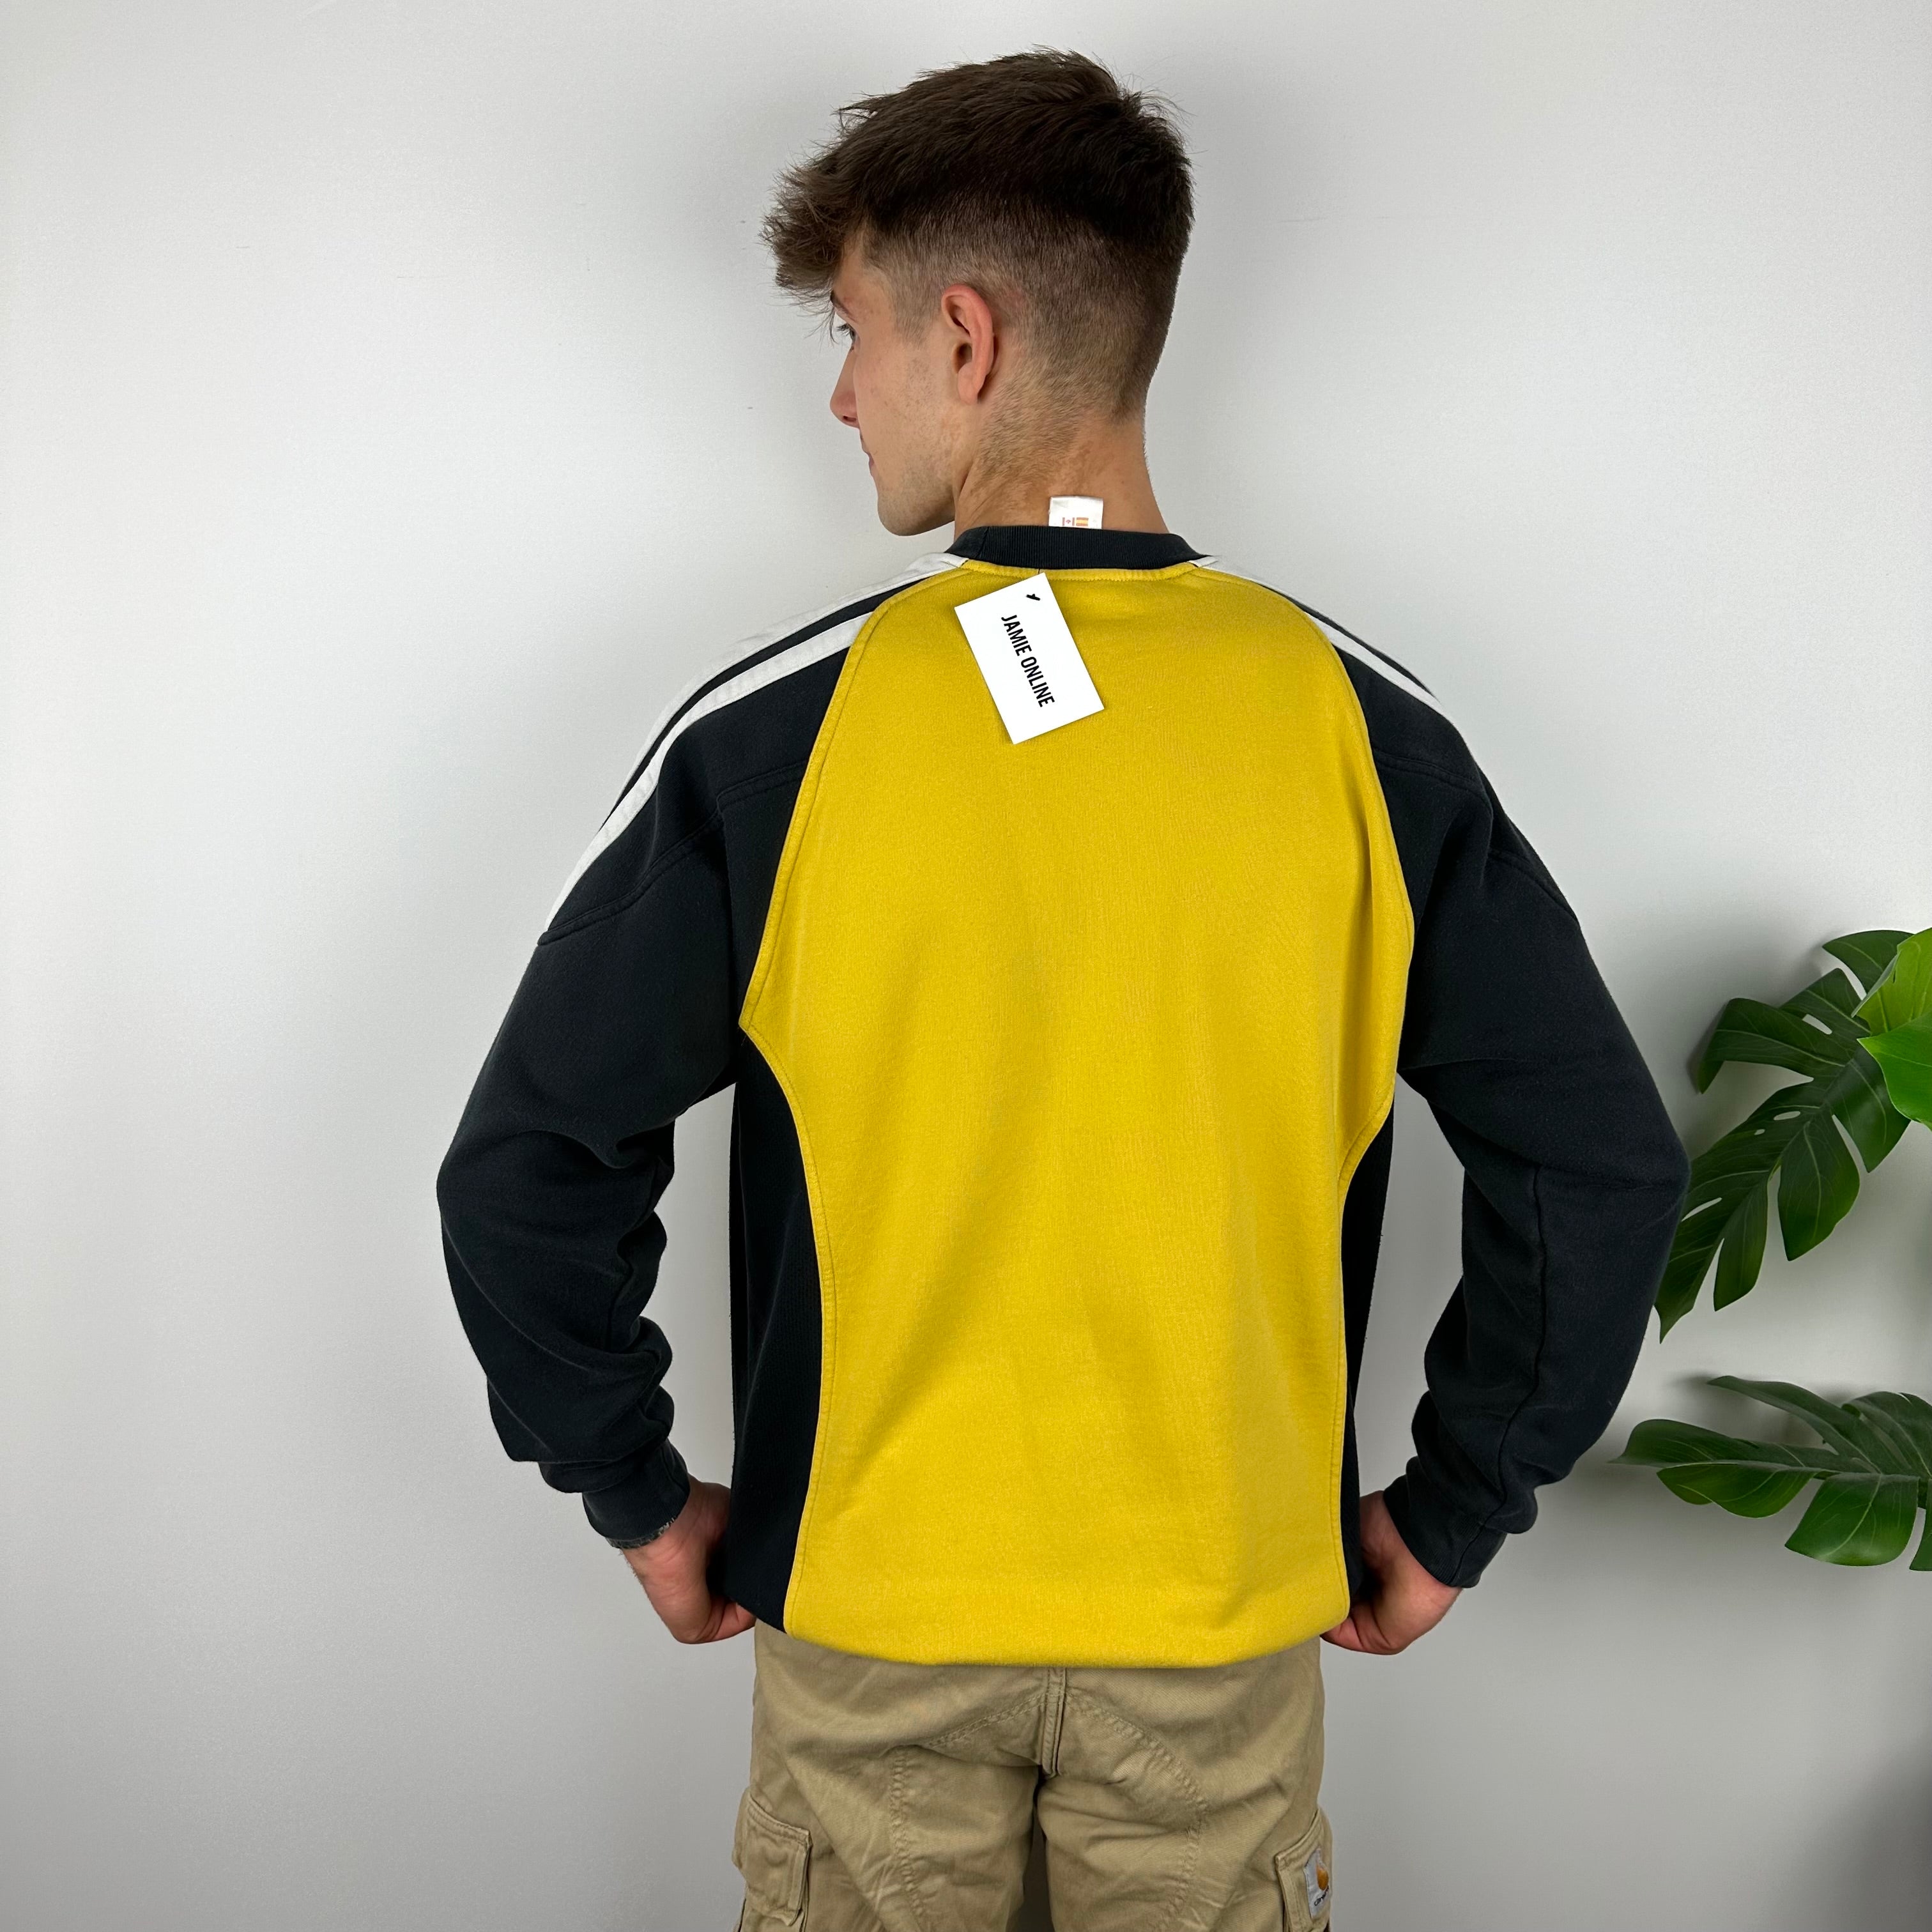 Adidas RARE Yellow Embroidered Spell Out Sweatshirt (L)